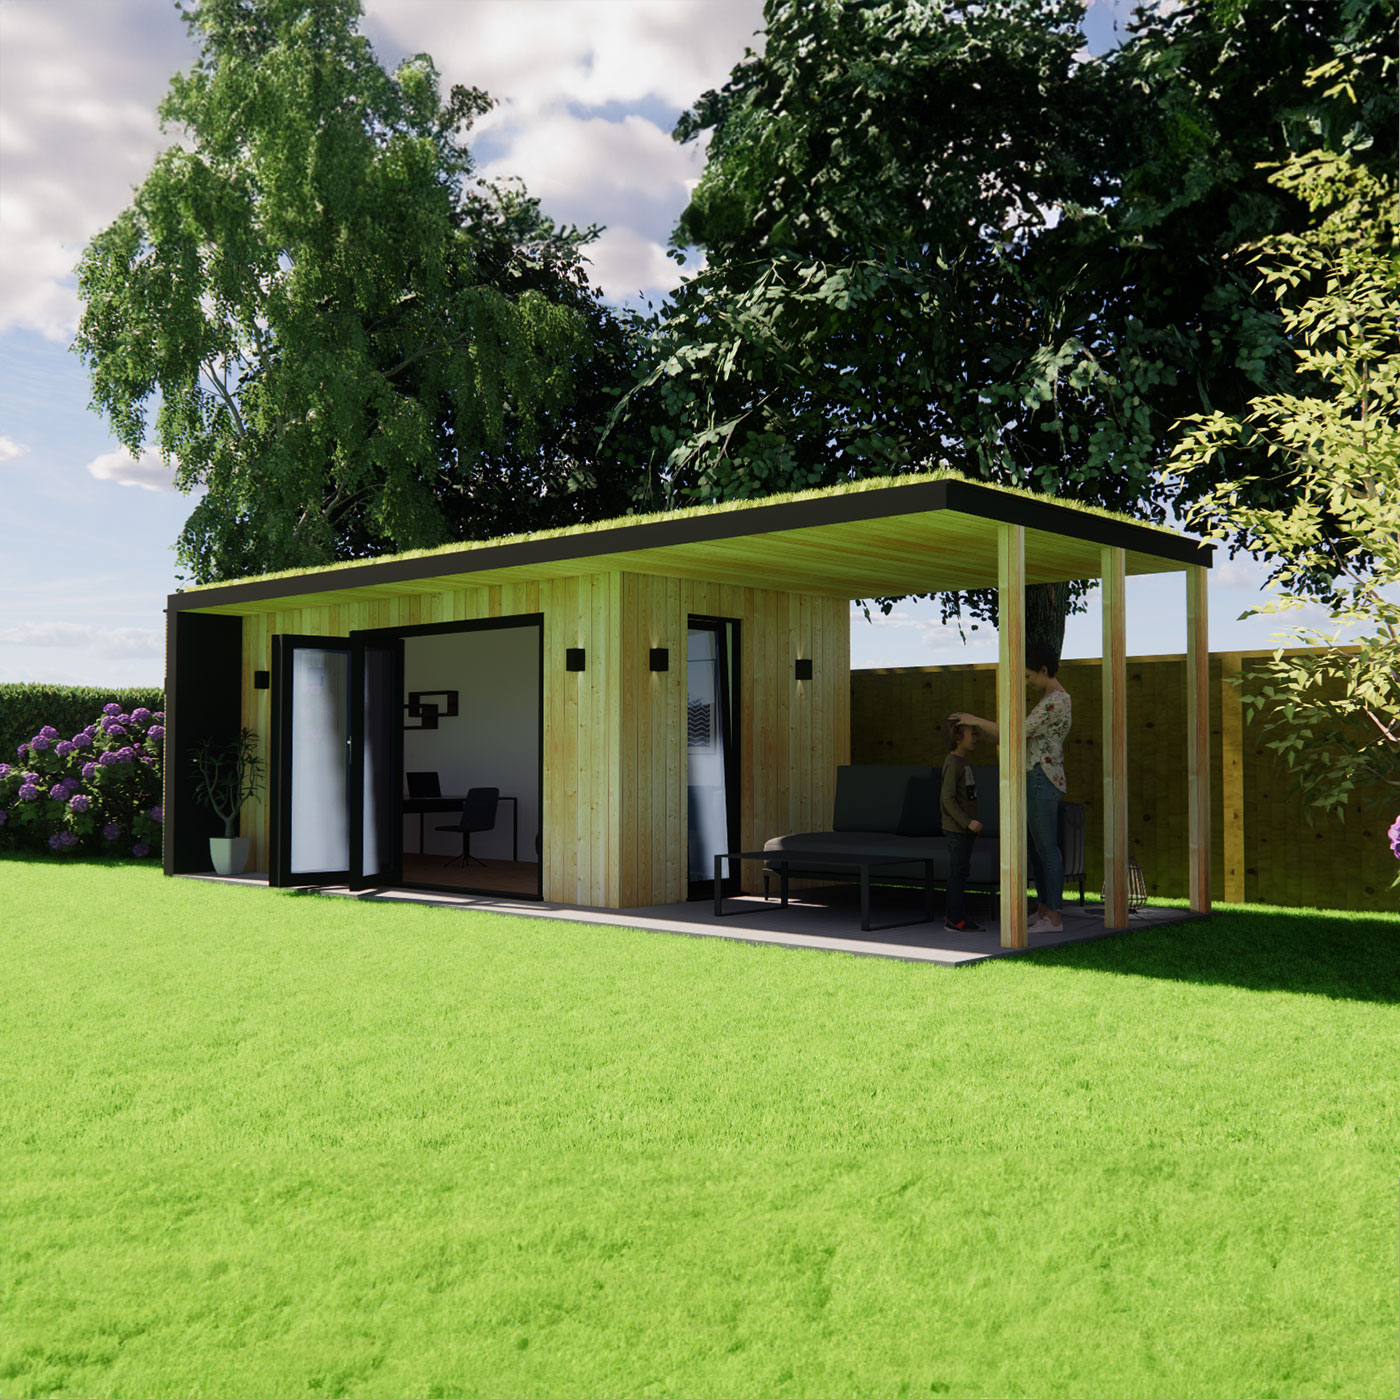 Visualisation of garden office with green roof 2.6m by 6.2m